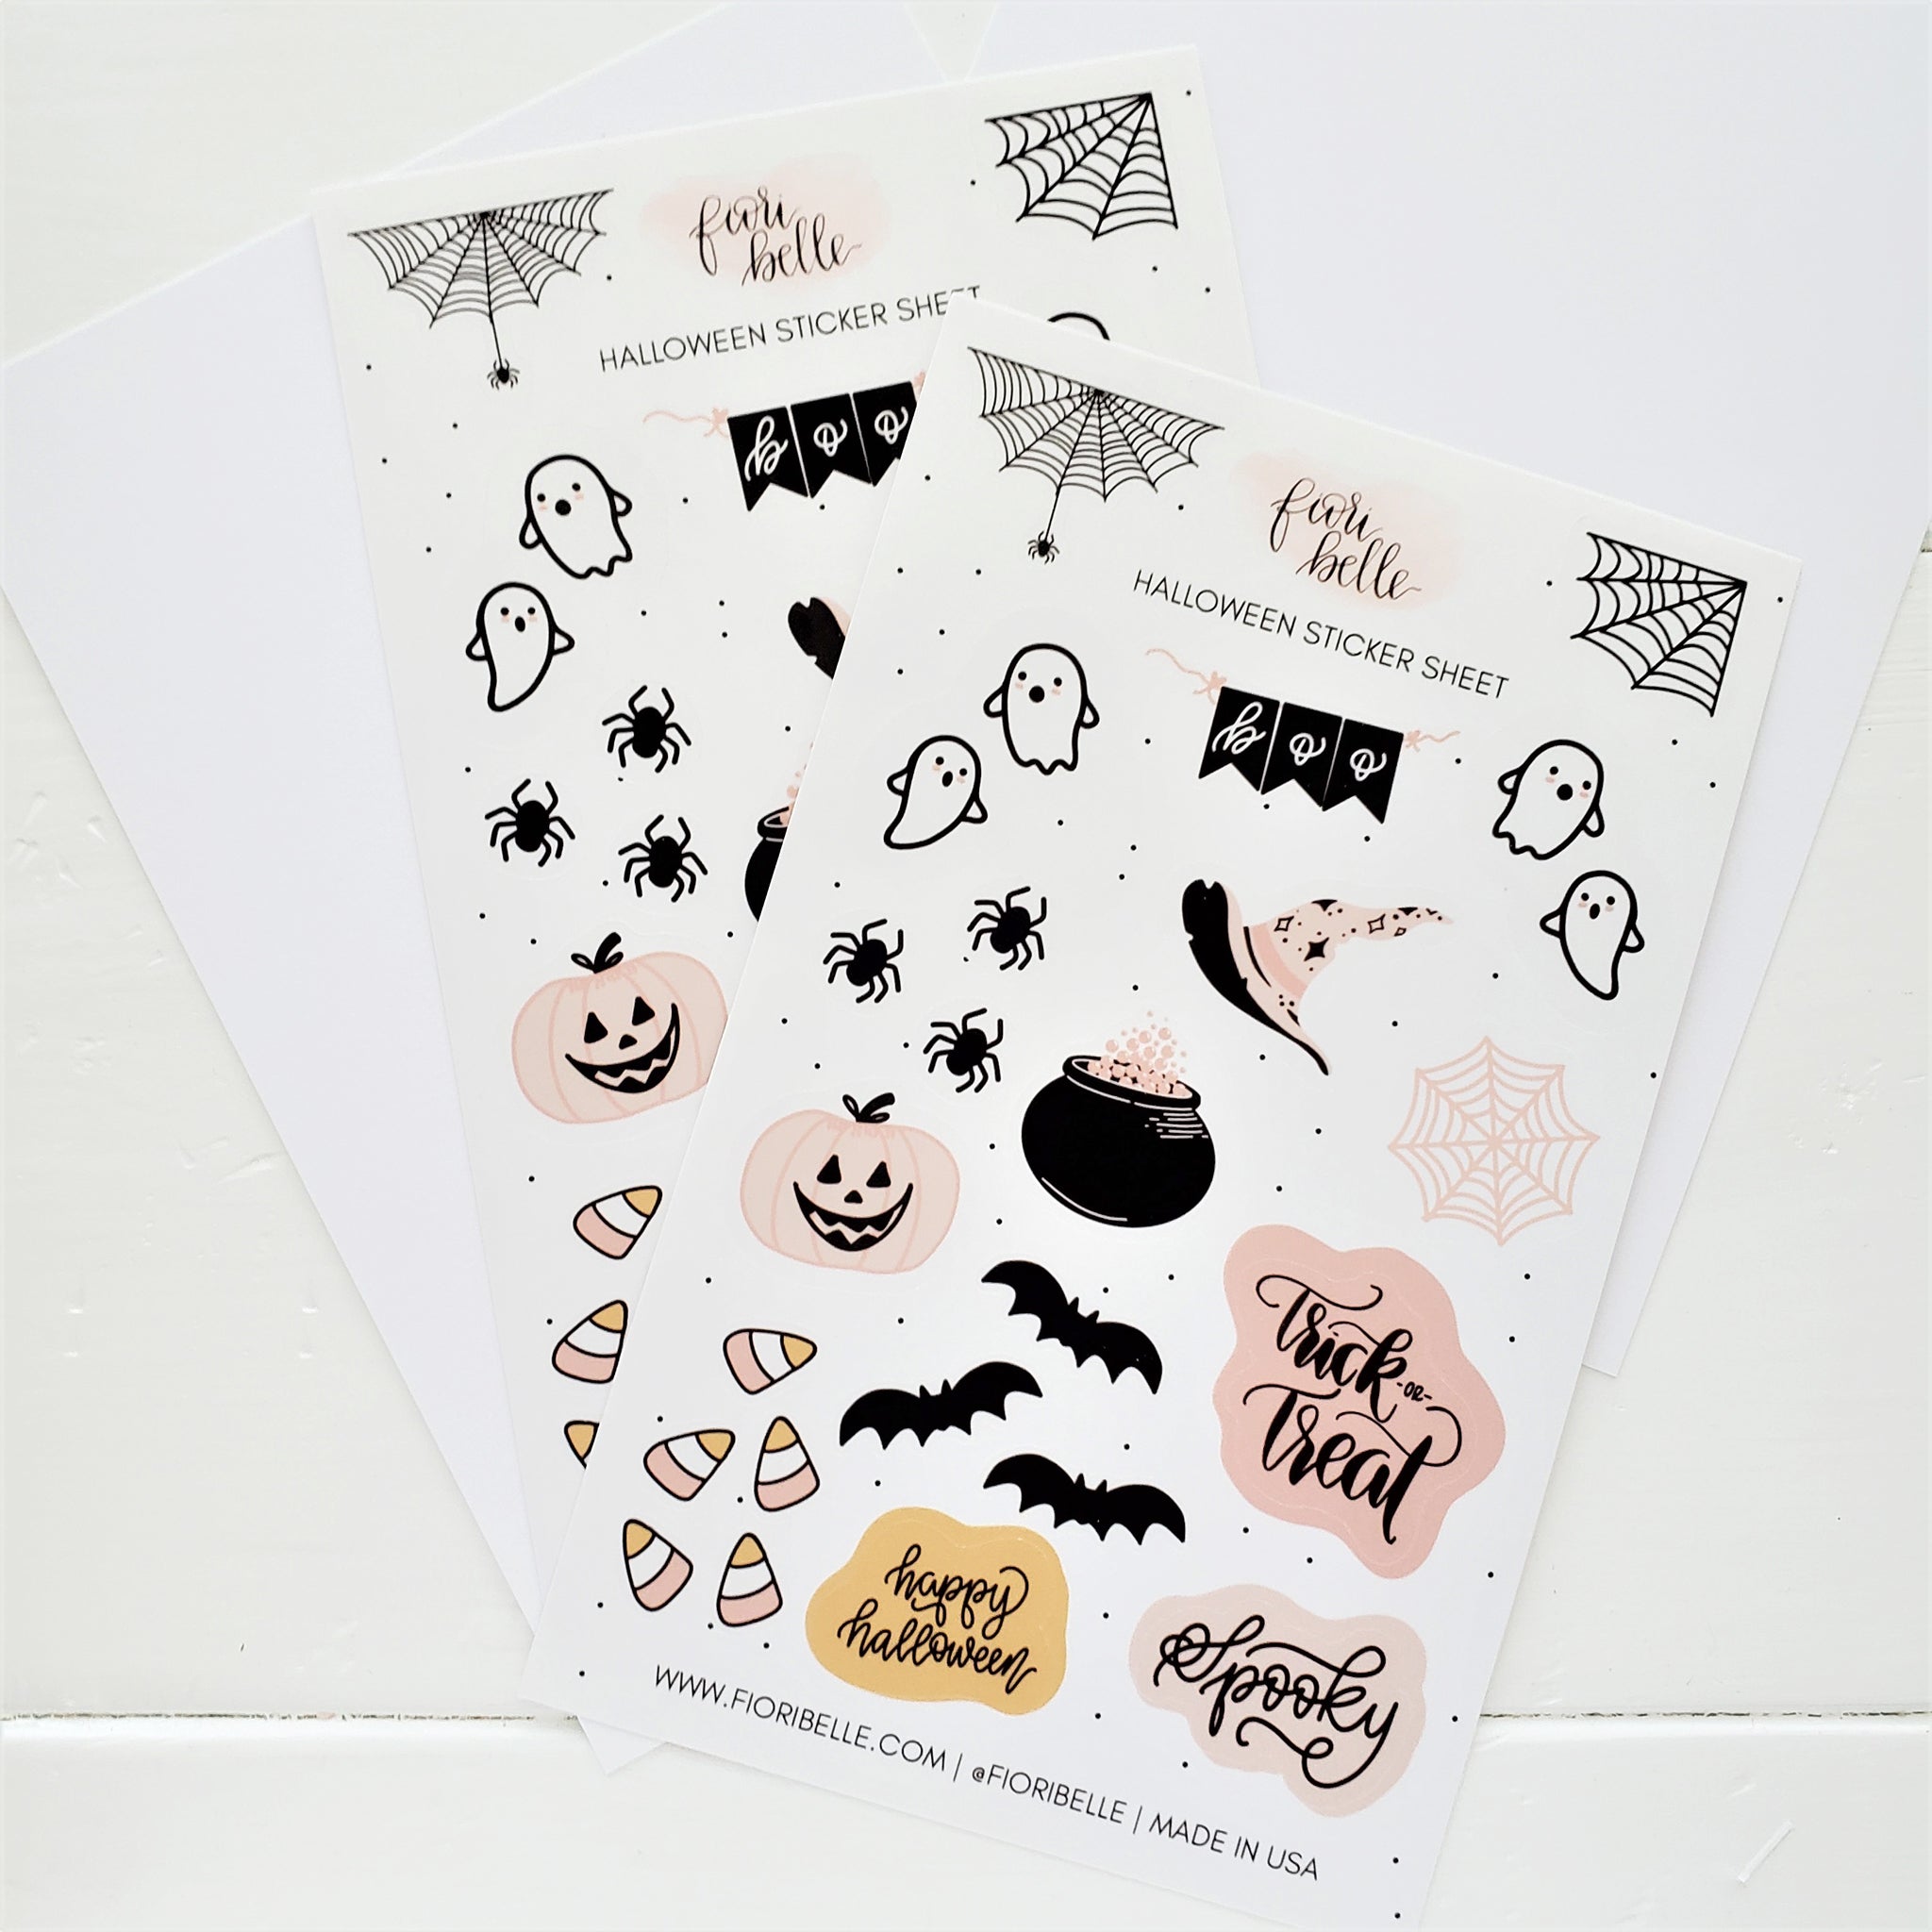 "Halloween Sticker Sheet featuring 23 glossy vinyl stickers including cute ghosts, spiders, and candy corn, hand-written halloween phrases, a witch cauldron & hat,  displayed on a pastel background. Great for personalizing planners, laptops, and water bottles.